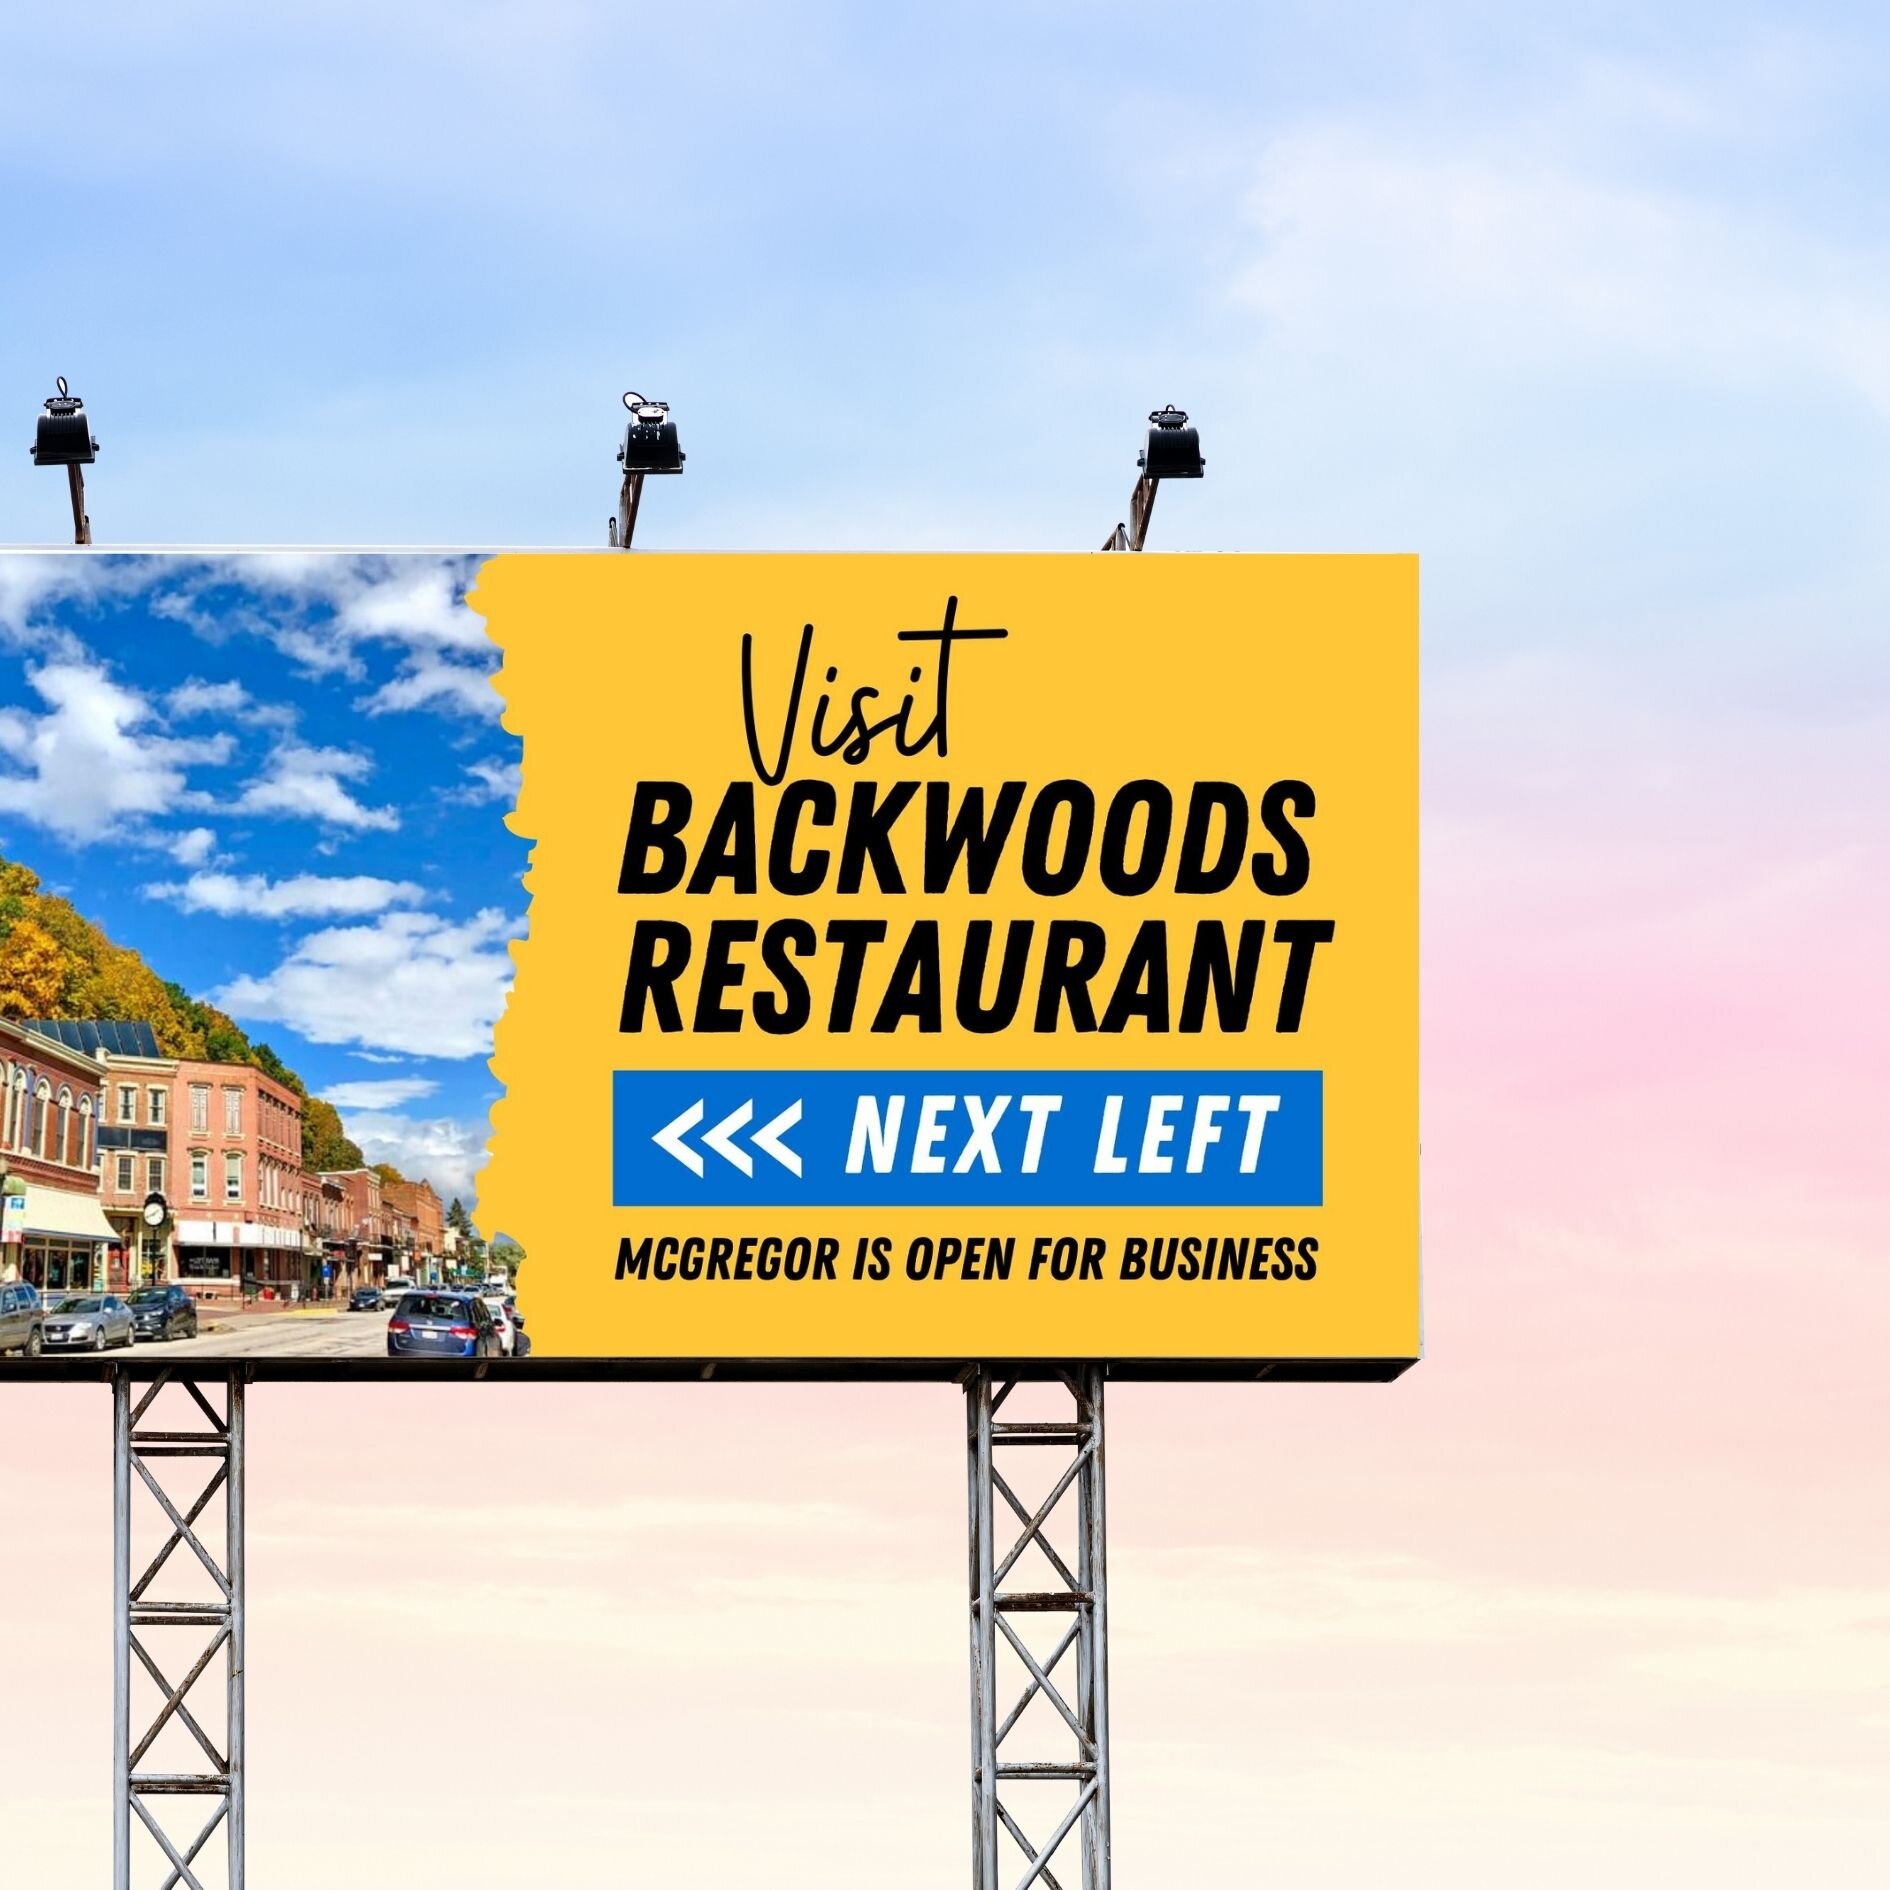 🚗 🛣️ Have You Spotted These Billboards on HWY 18?
You might have noticed something new if you've recently driven from Prairie du Chien to Elkader. I had the chance to design this billboard for @backwoods_bar_and_grill in McGregor, Iowa!

These aren